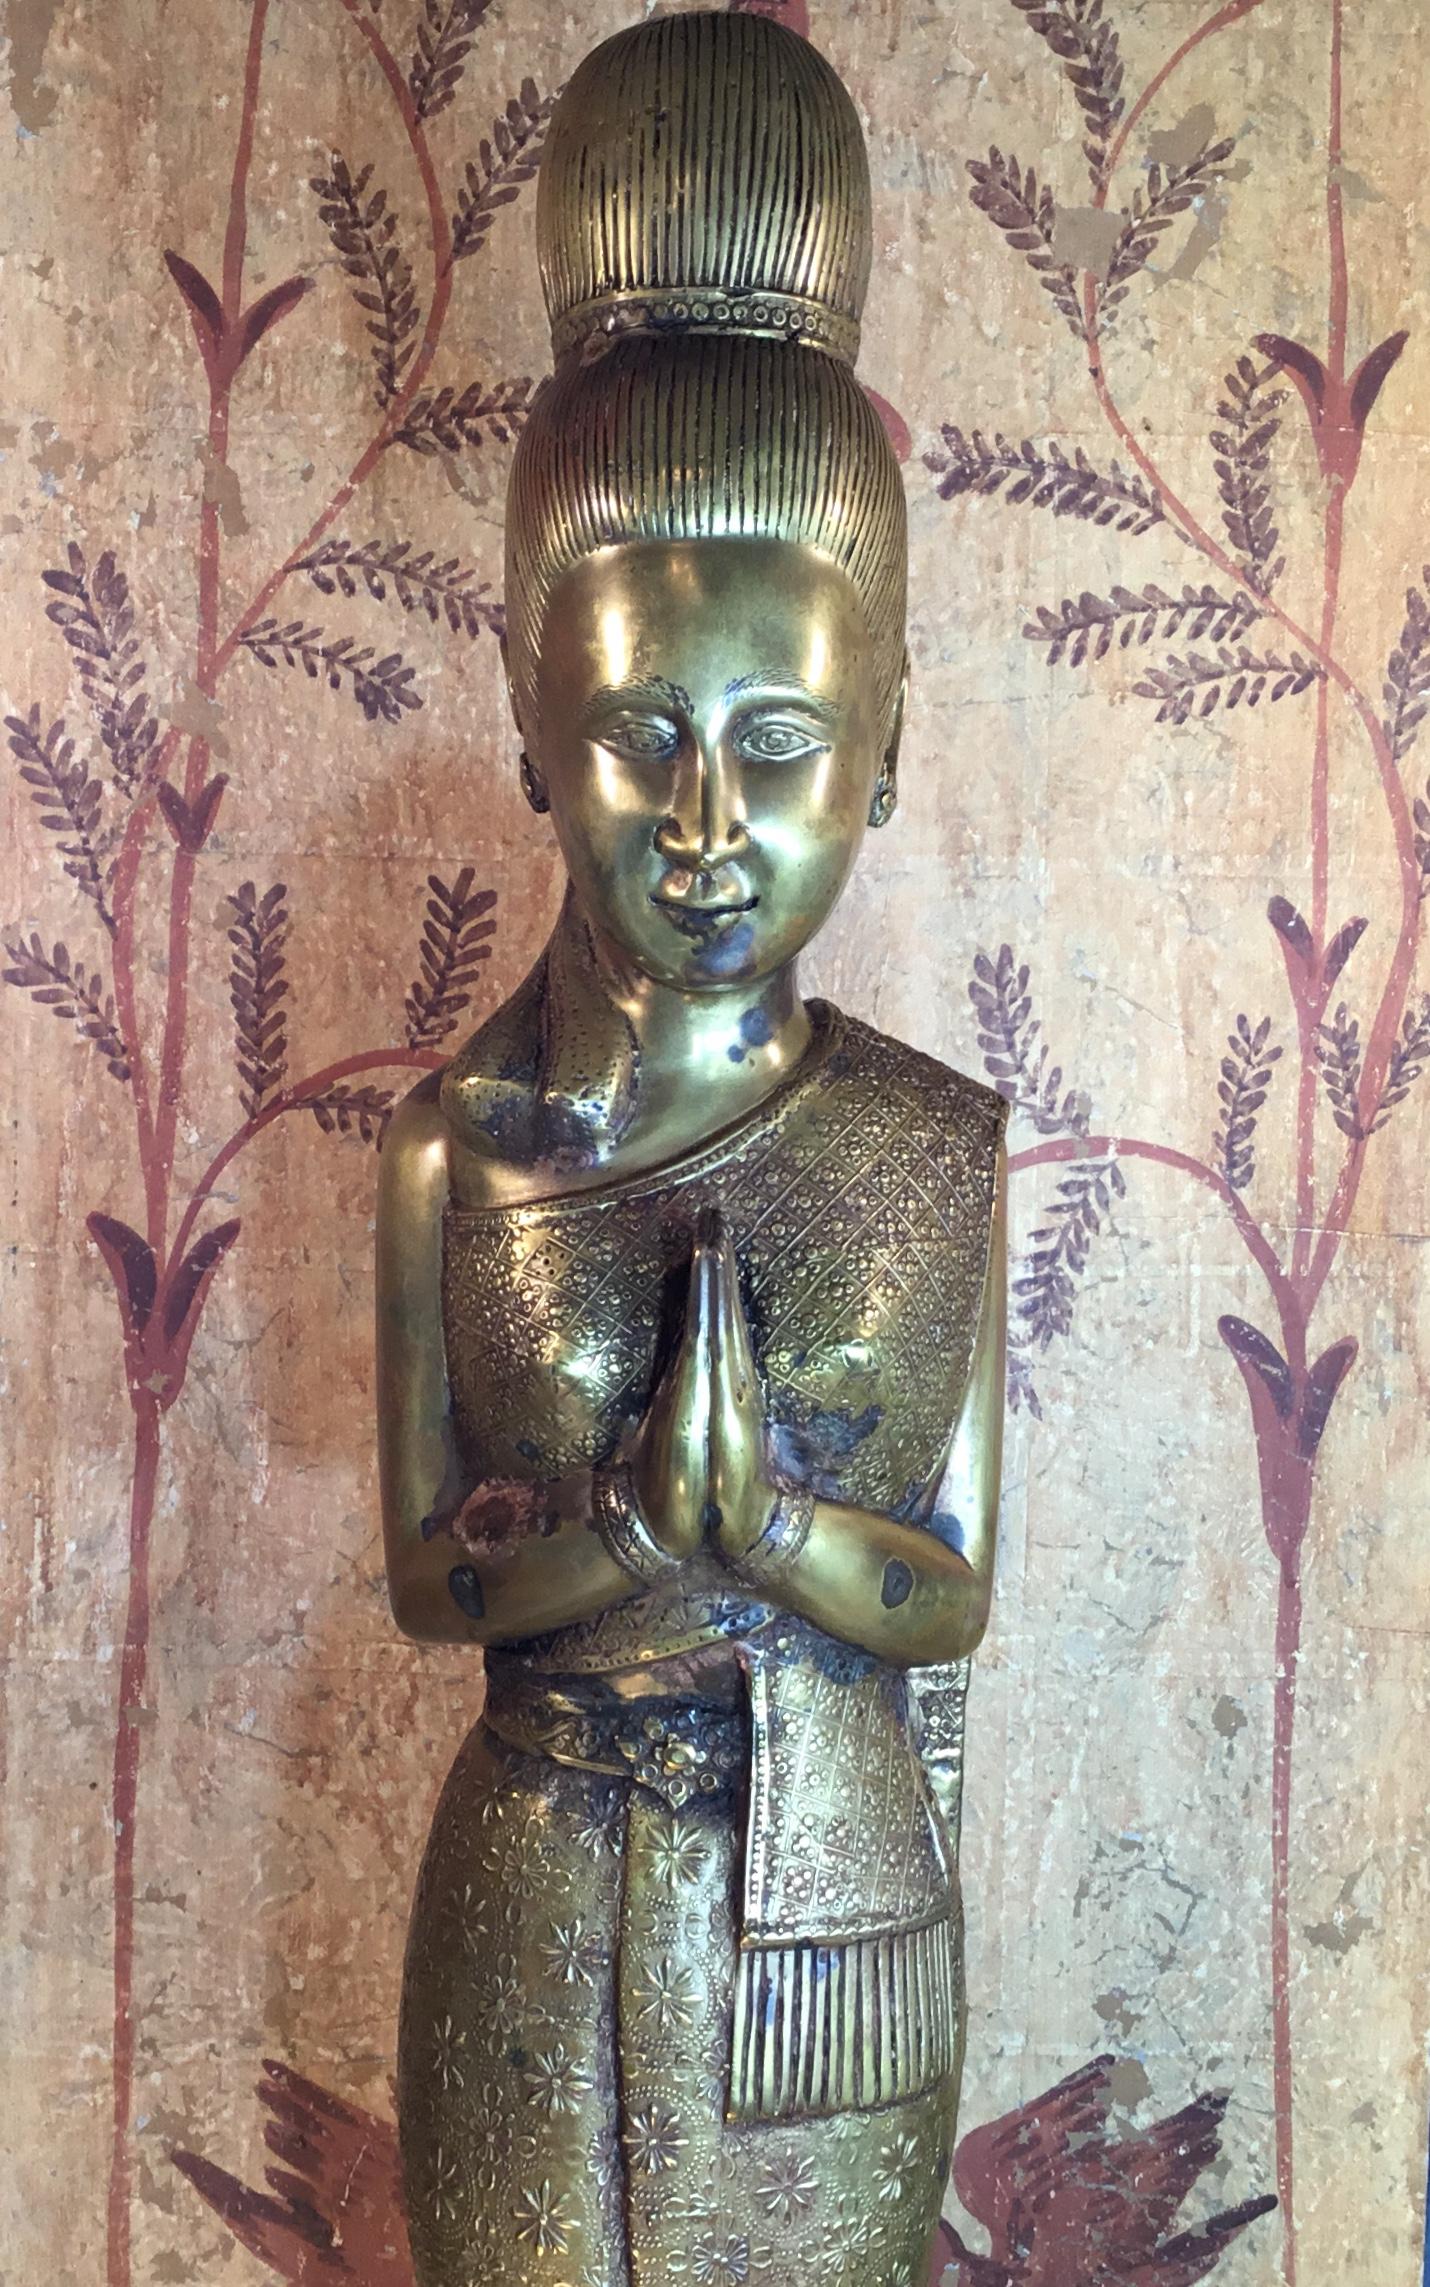 Elegant statue made of bronze, beautiful facial expression, hands pointed forward in grace and goodwill. Exceptional dress with vivid stars like repetitive motif all around. One of a kind object of art for display.